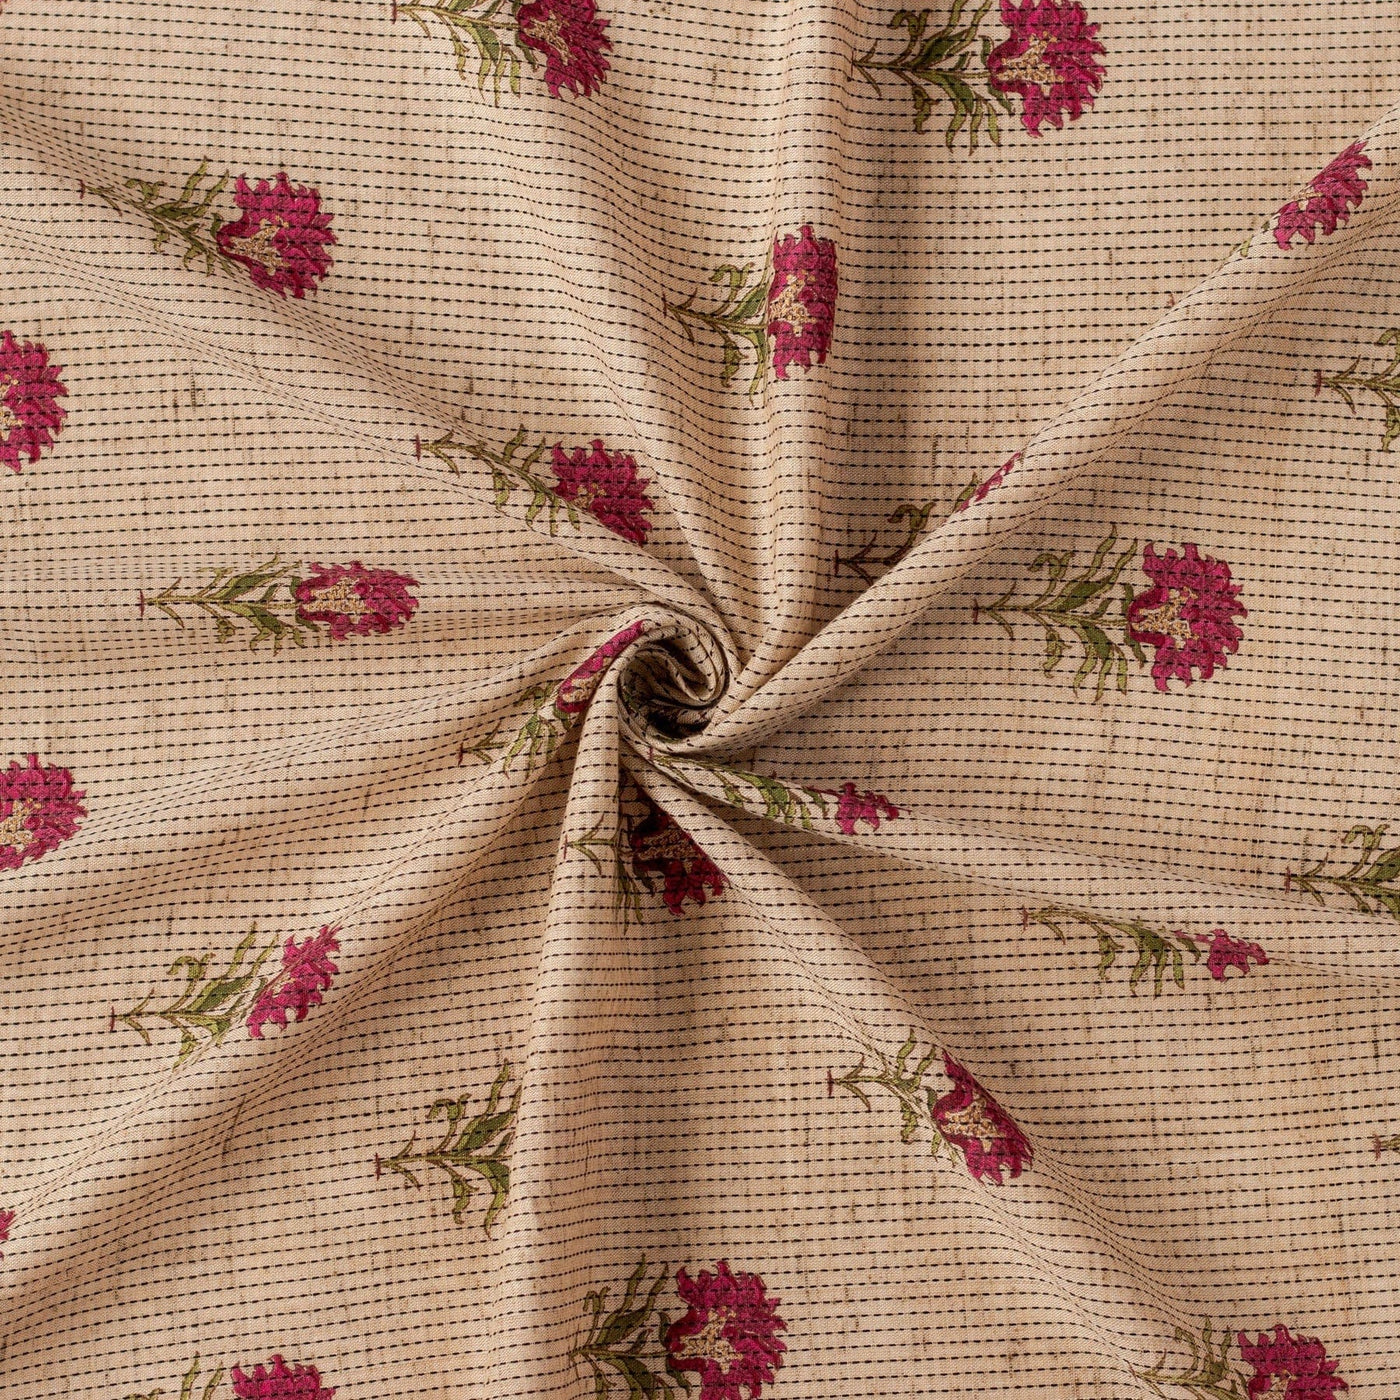 Fabric Pandit Fabric Beige and Magenta Floral Woven Kantha Hand Block Printed Pure Cotton Fabric (WIdth 44 Inches)